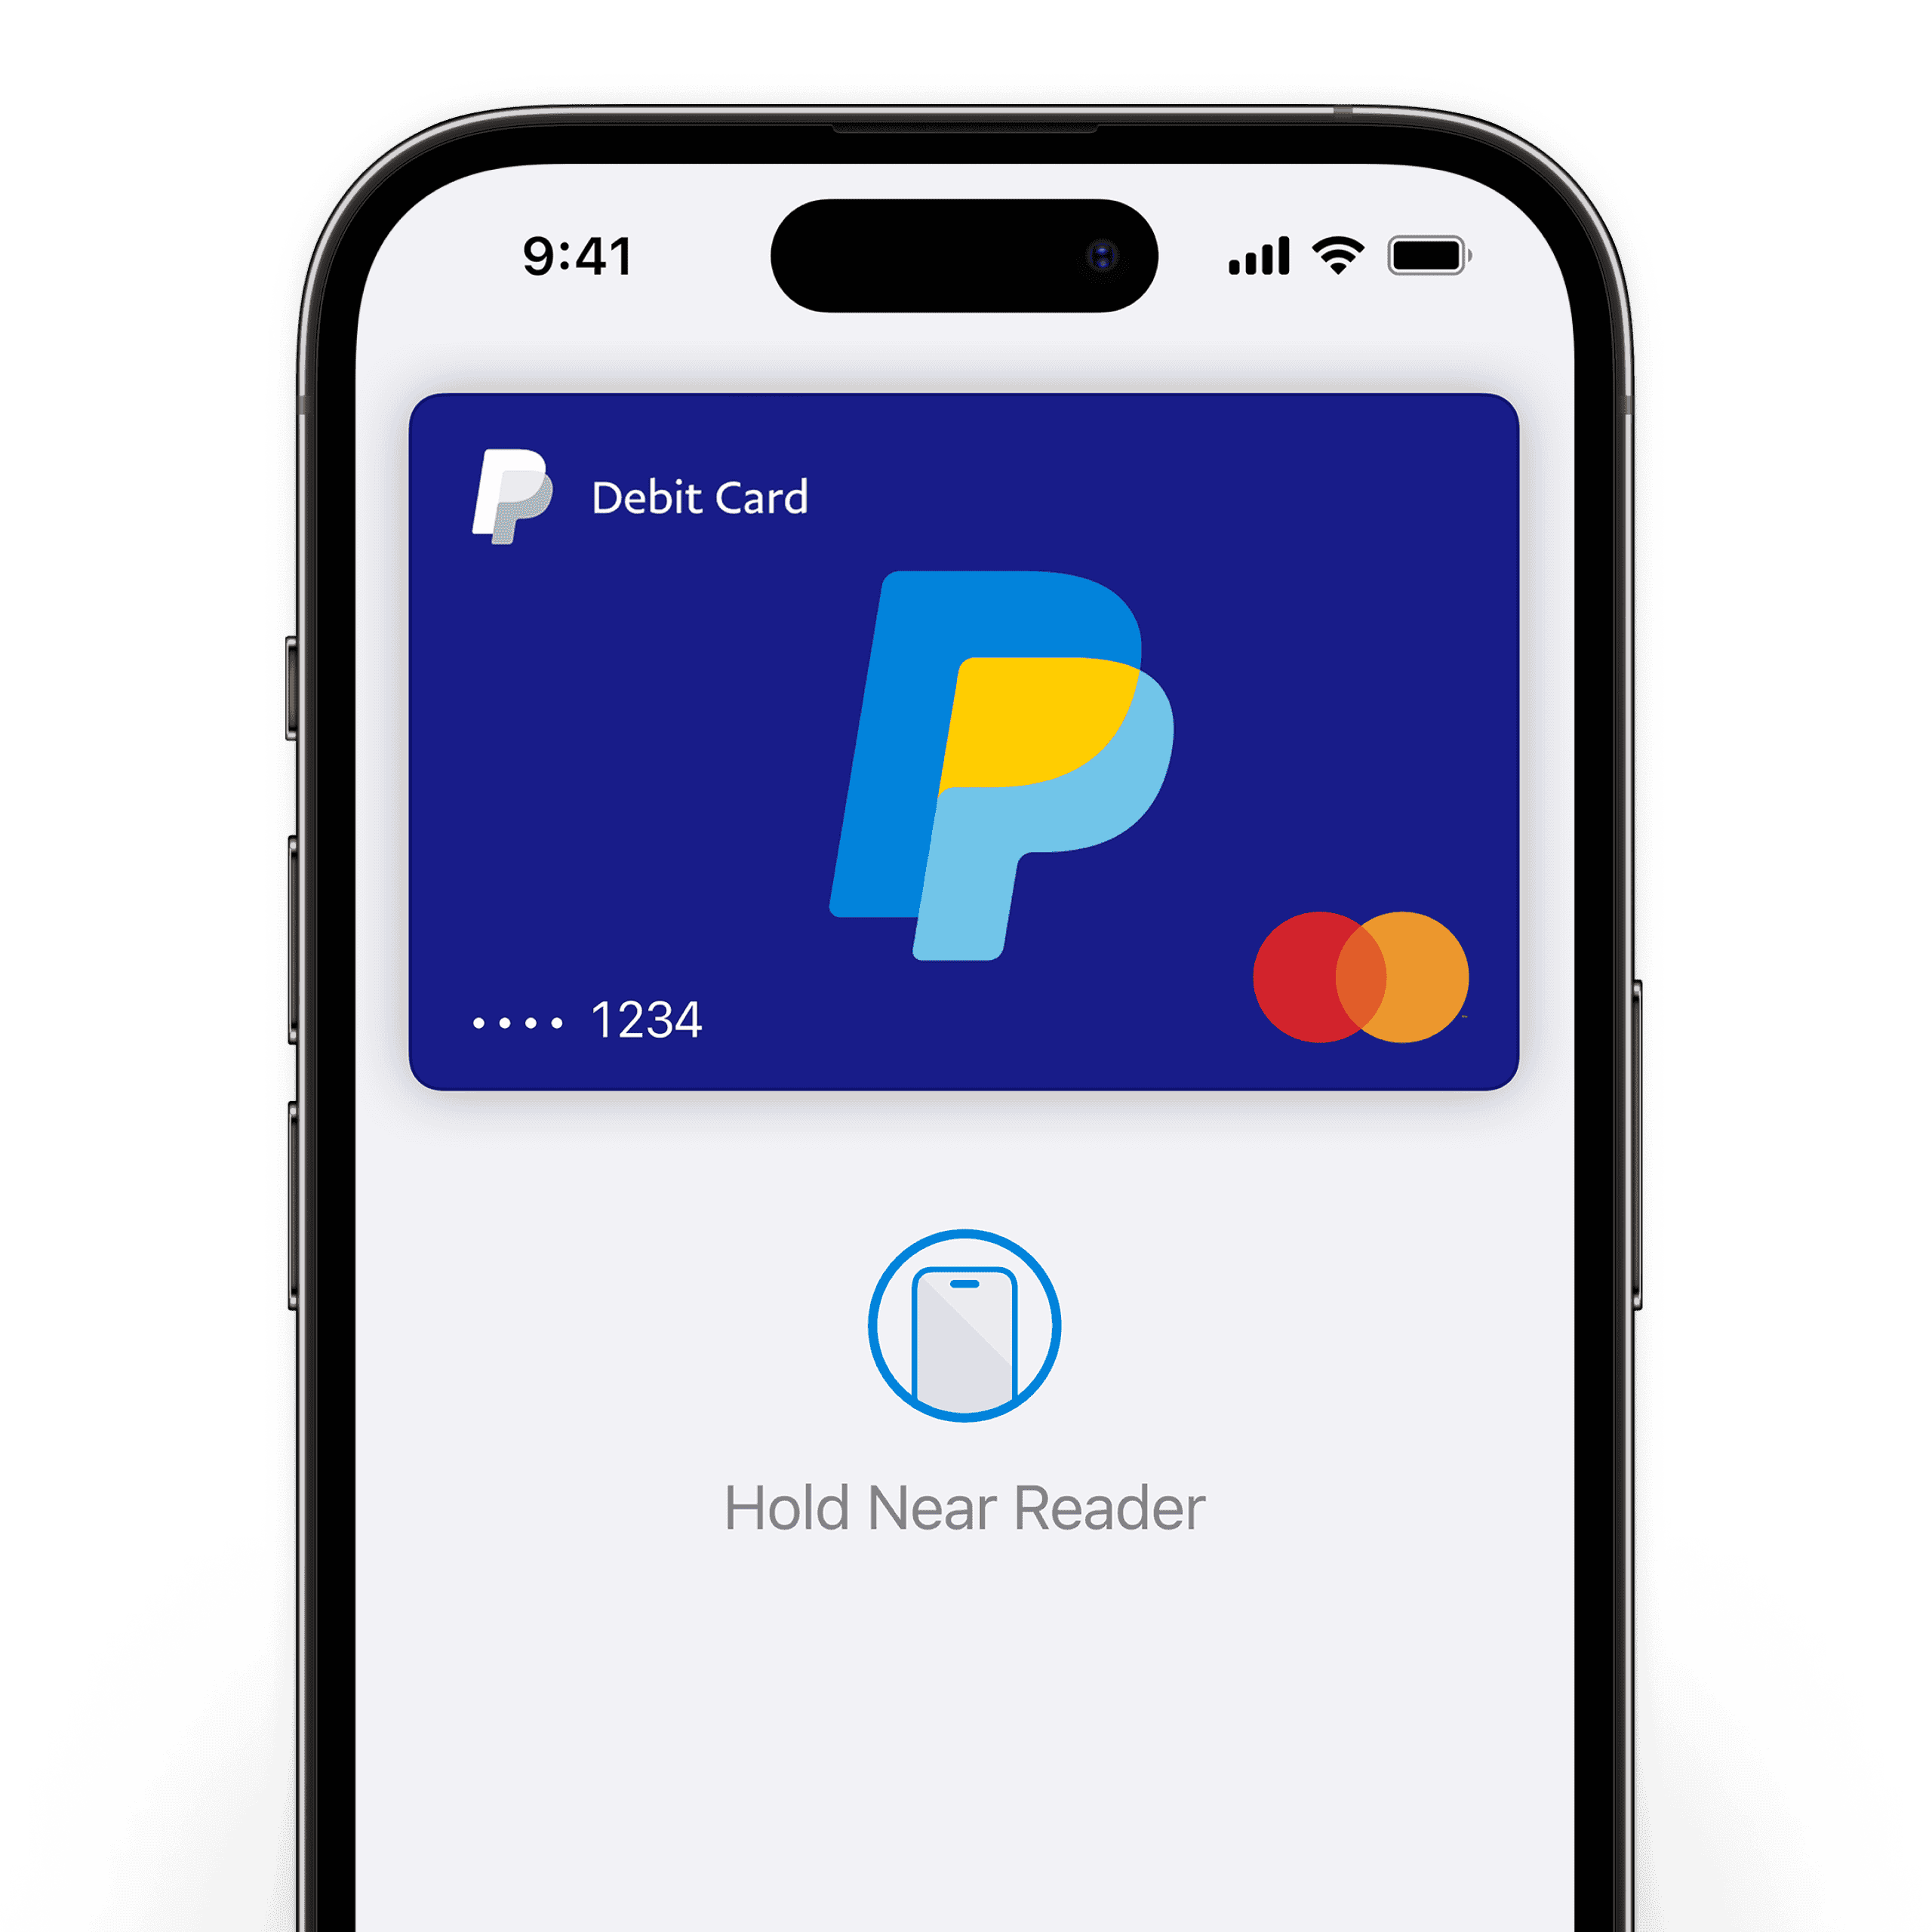 PayPal Balance: What It Is And How to Check It